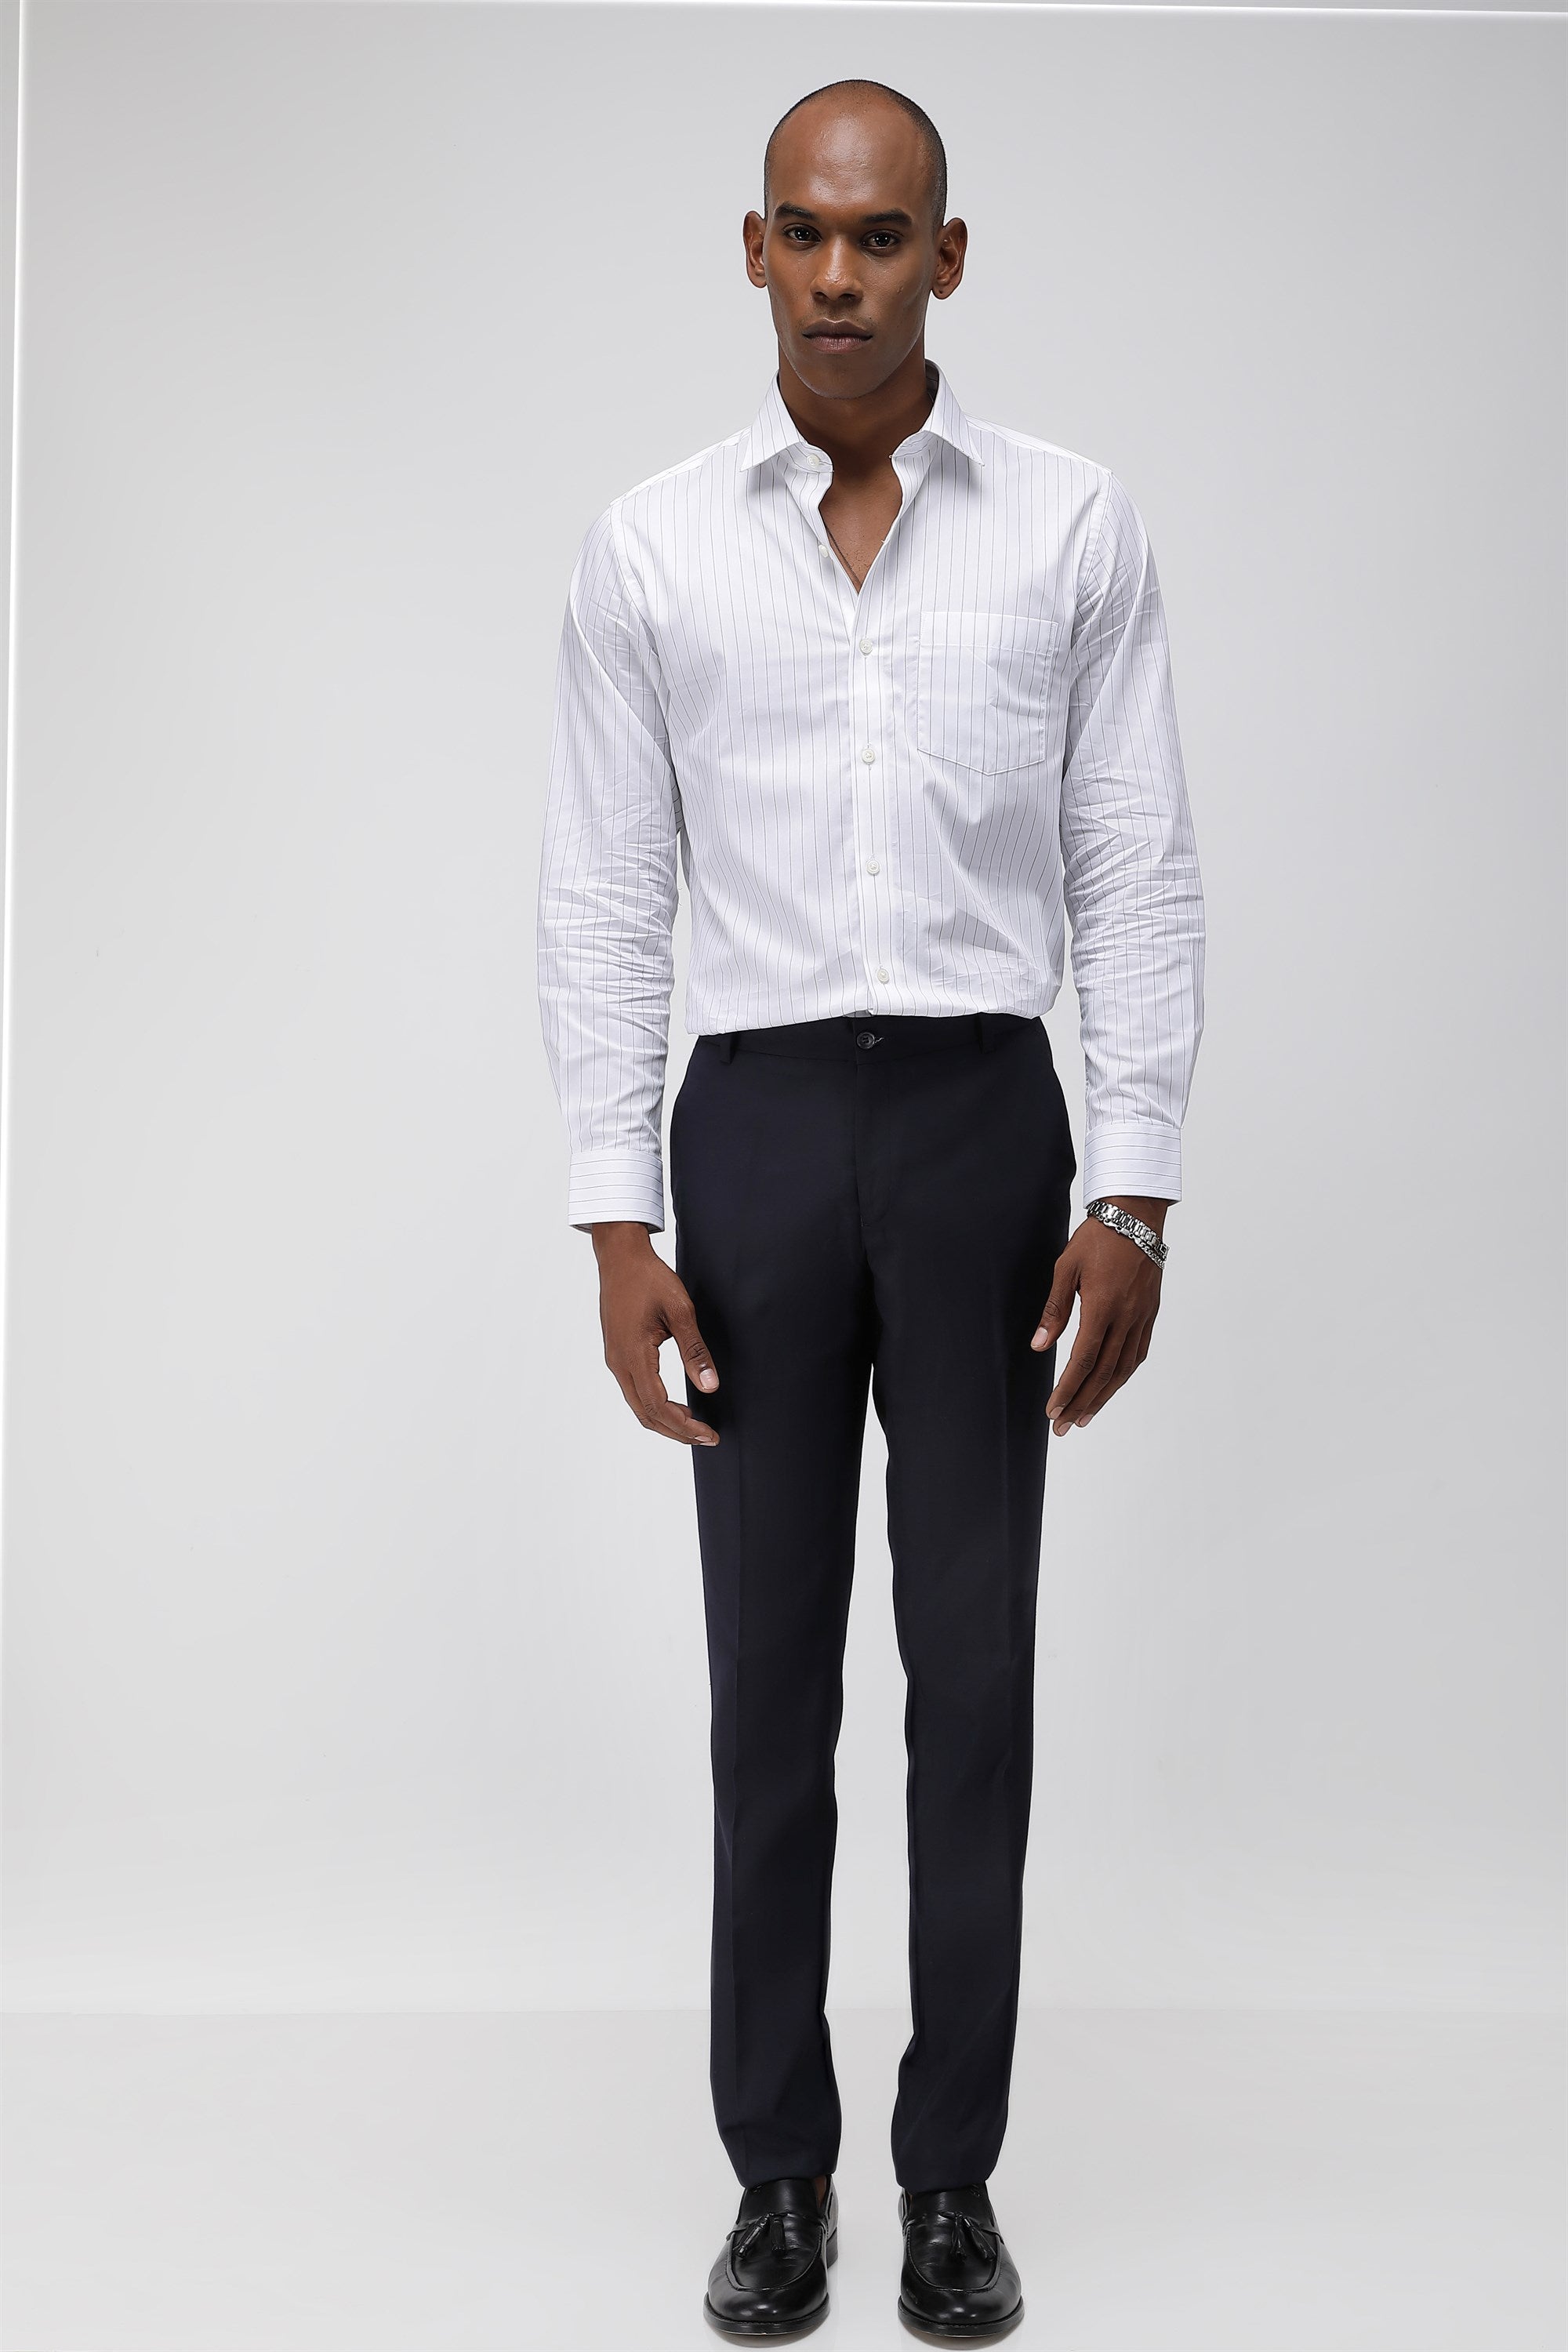 T the brand Formal Twill Flat Front Trouser - Navy Blue